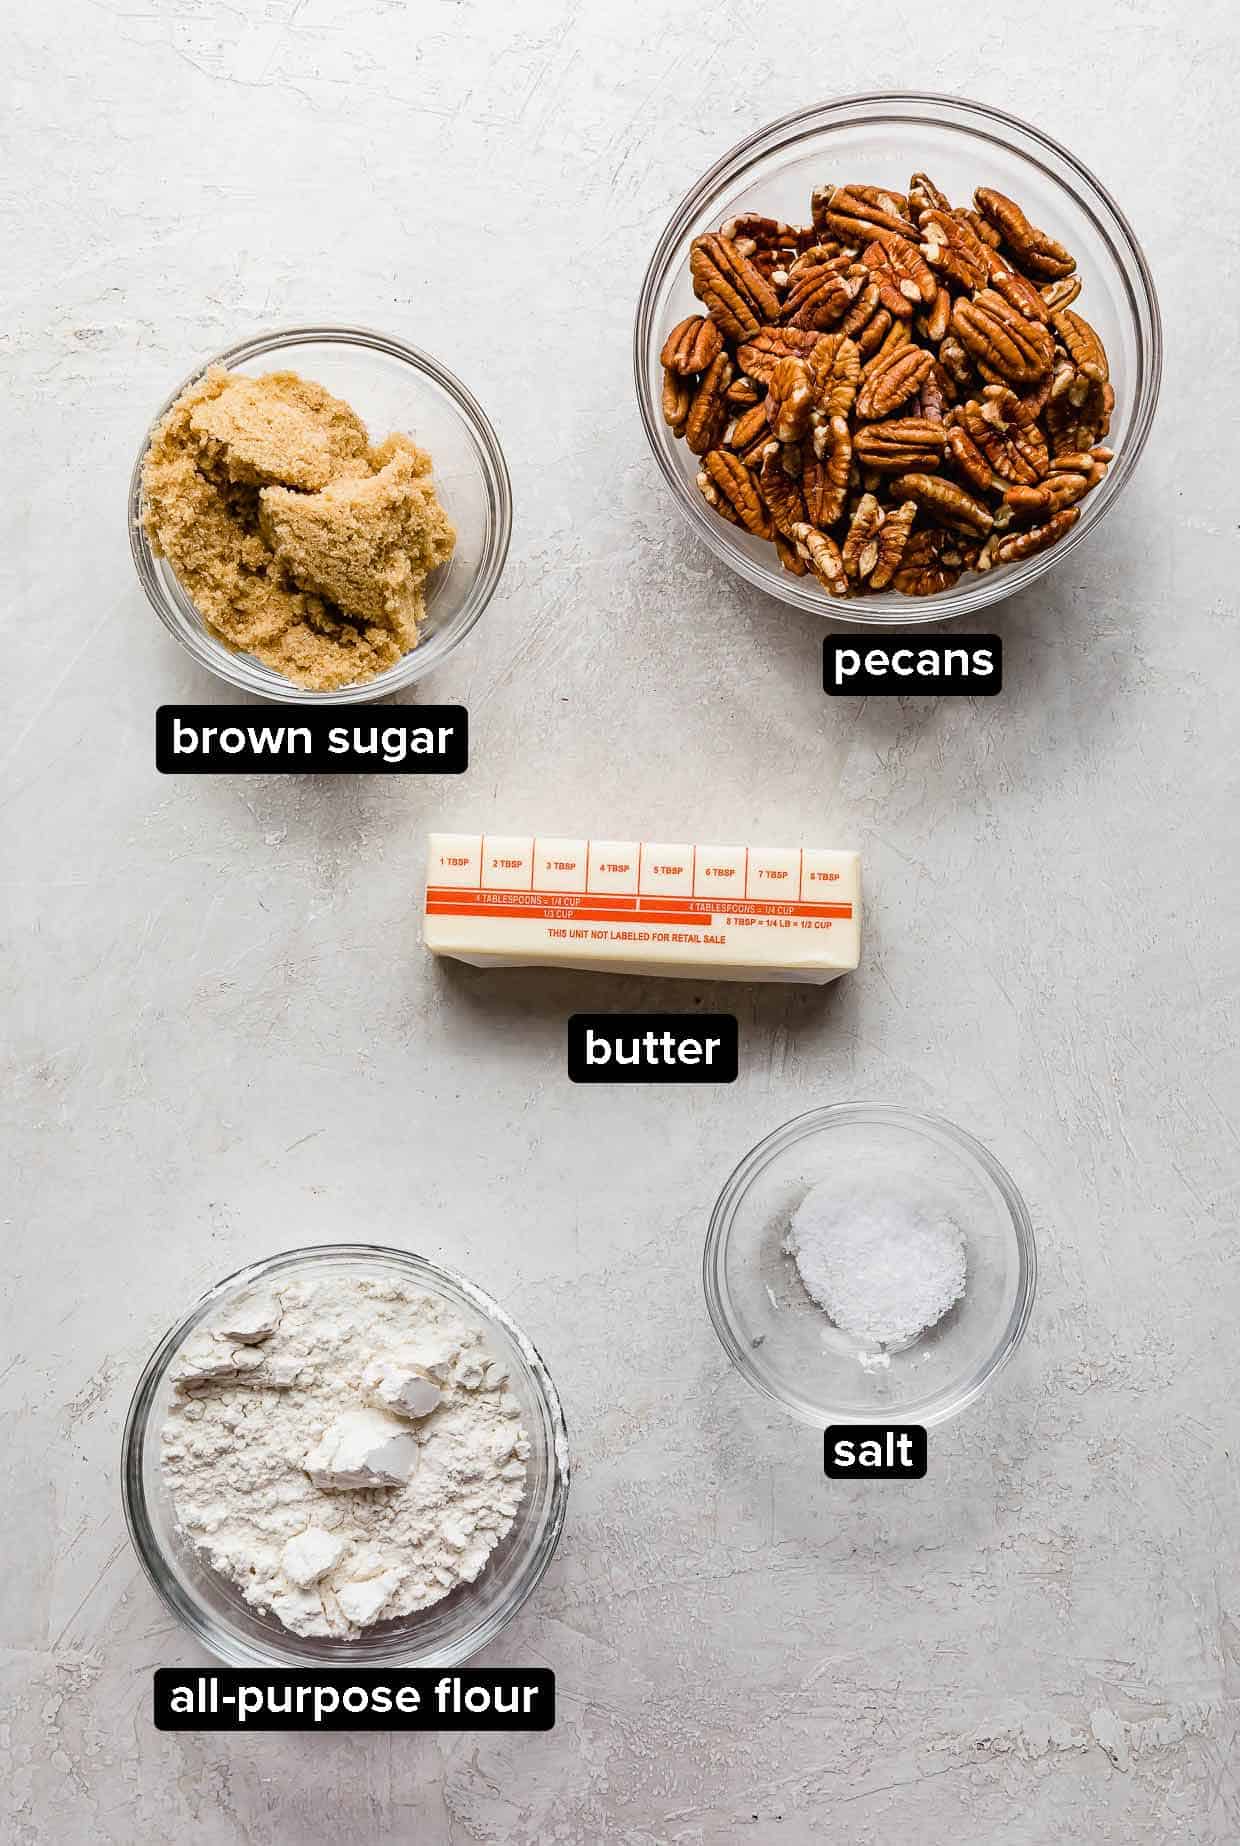 Easy Sweet Potato Casserole pecan topping ingredients portioned into glass bowls on a light gray background.